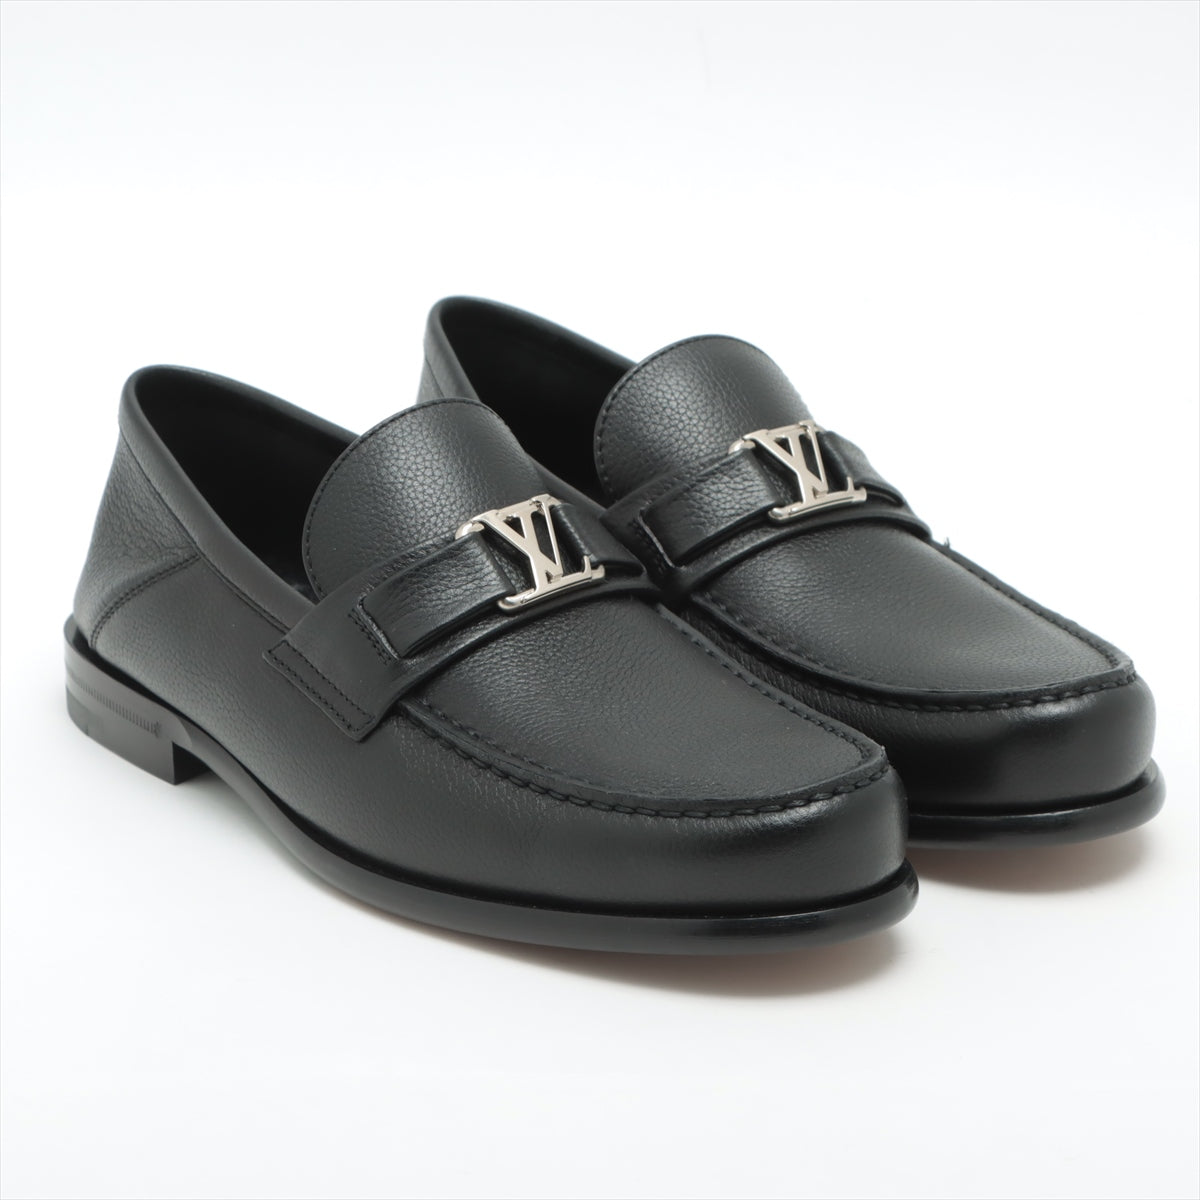 Louis Vuitton Major line 20 years Leather Loafer 5 1/2 Men's Black FA0260 monogram brushed insole There is a box